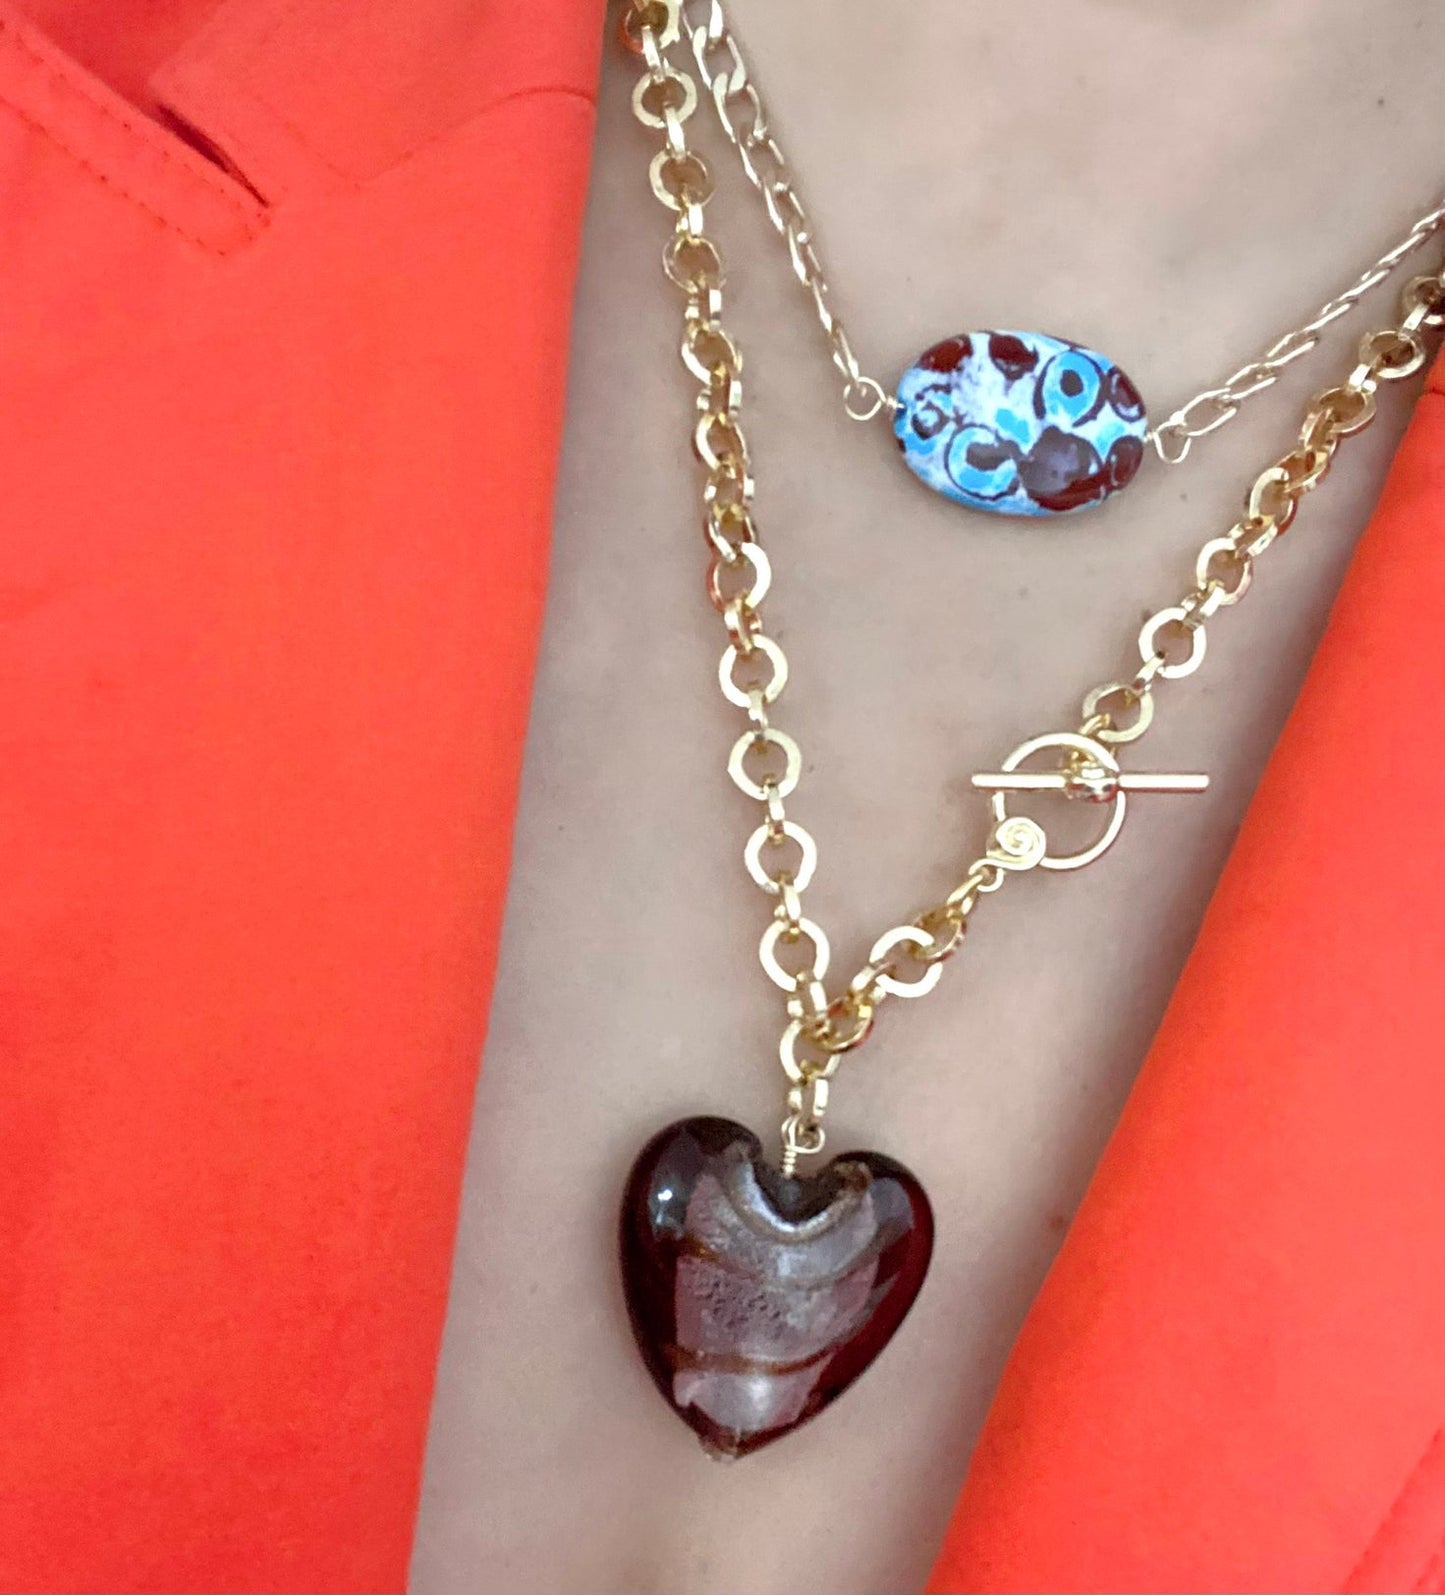 N79-SHORT NECKLACE - HEART RED